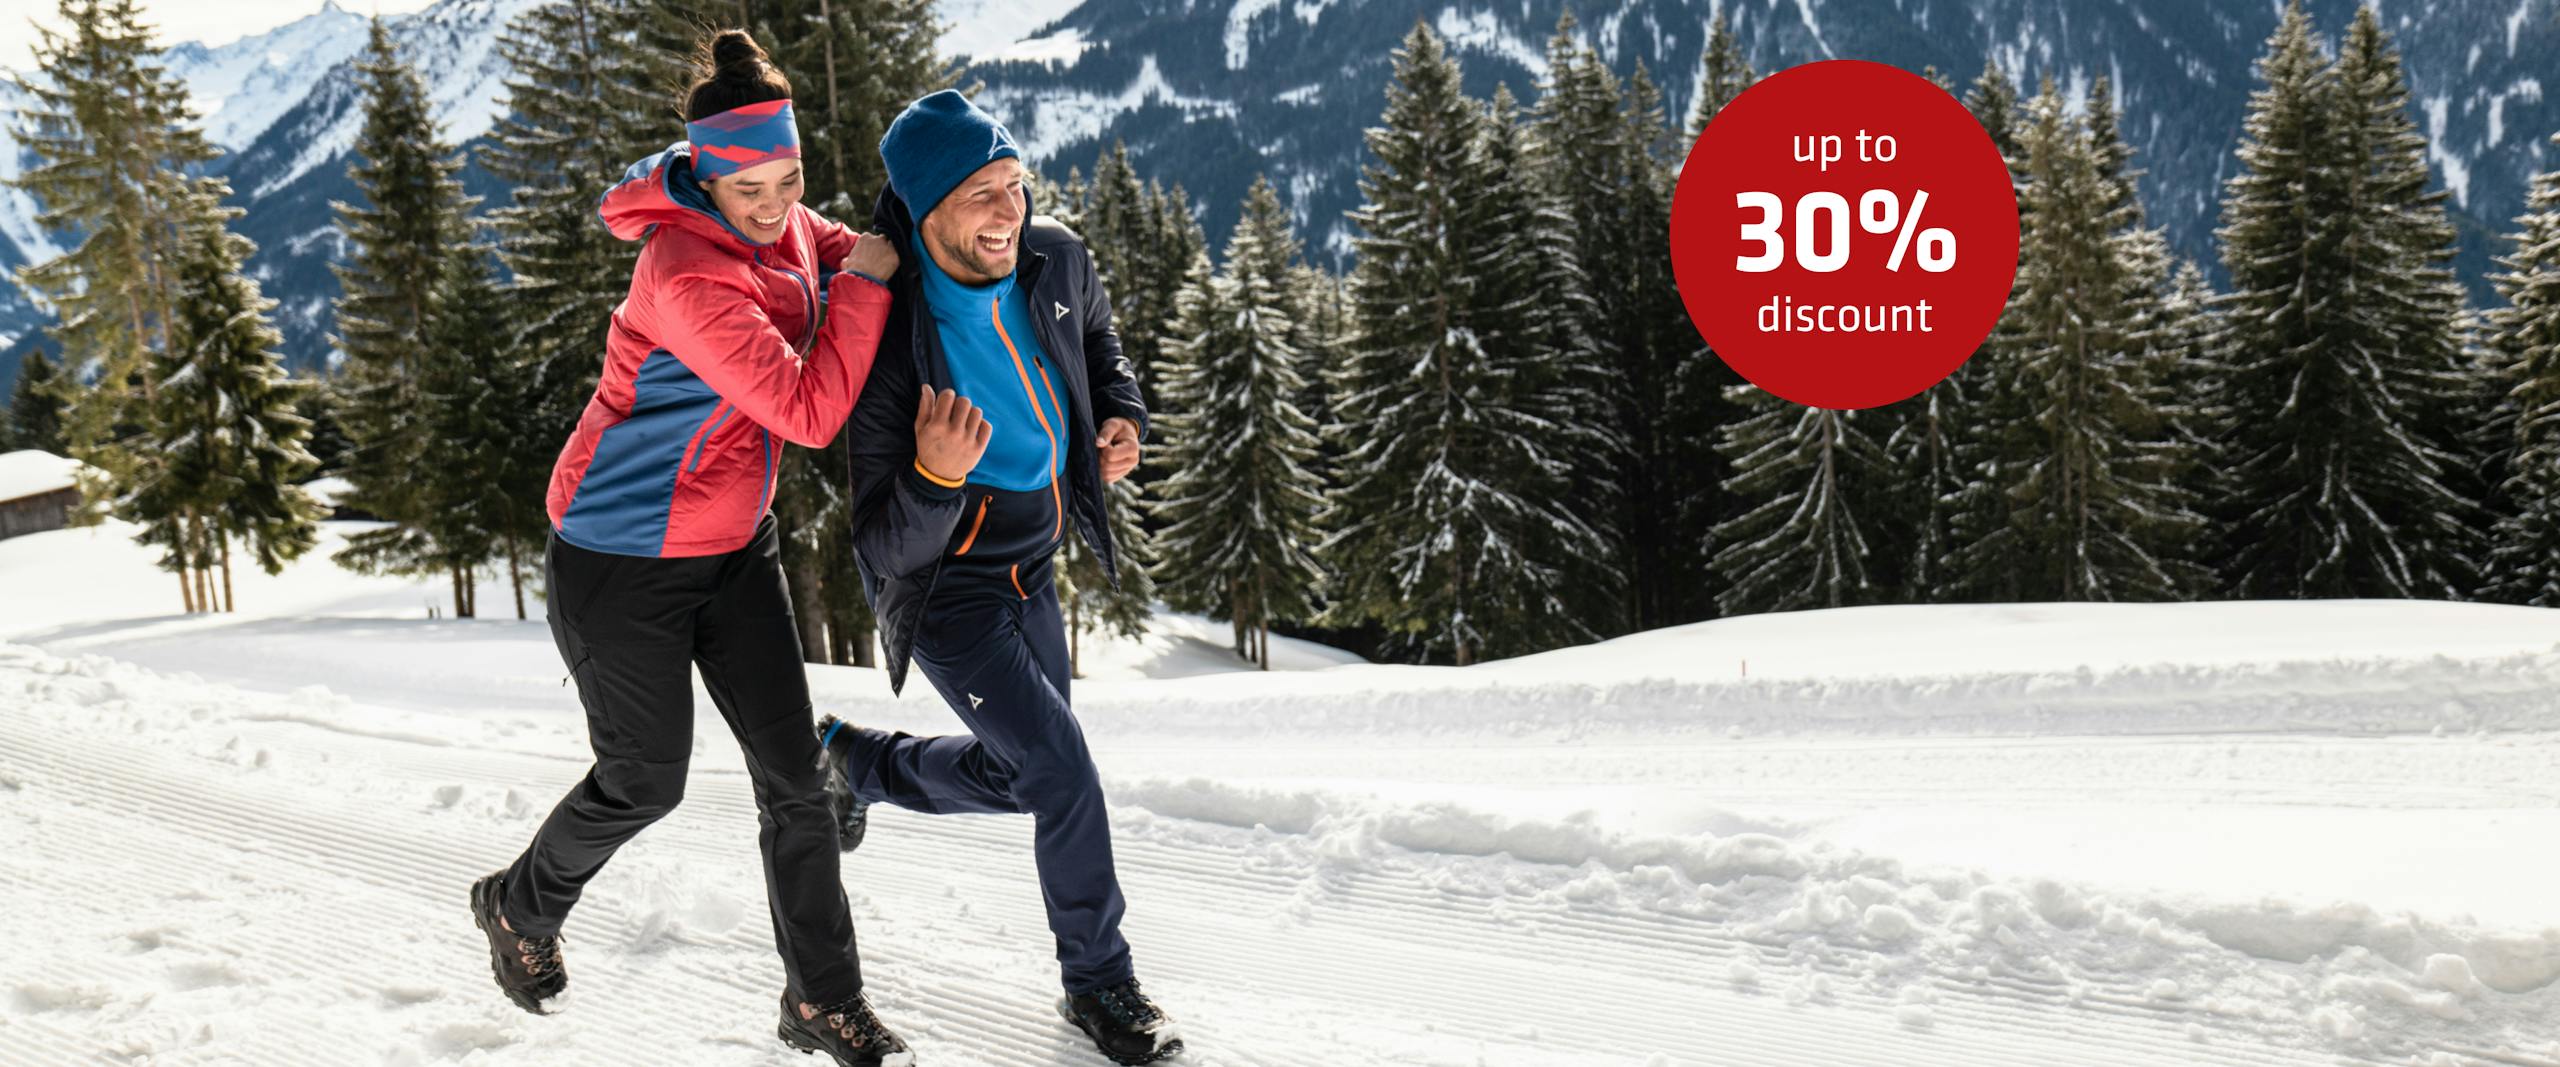 and Outdoor, Schöffel clothing sports | ski